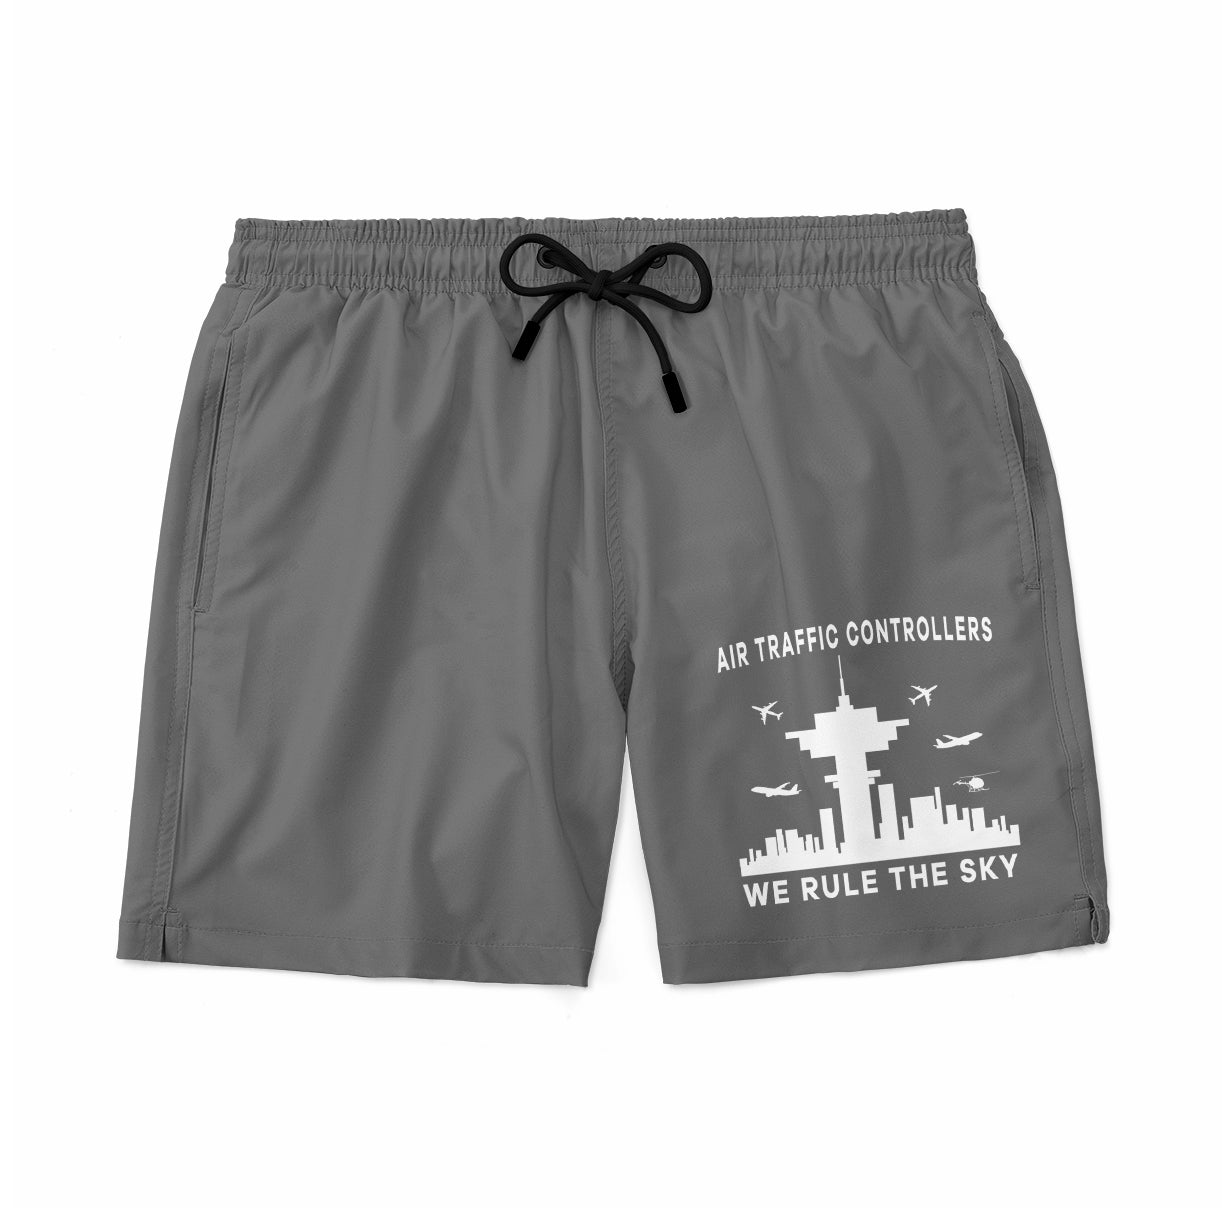 Air Traffic Controllers - We Rule The Sky Designed Swim Trunks & Shorts